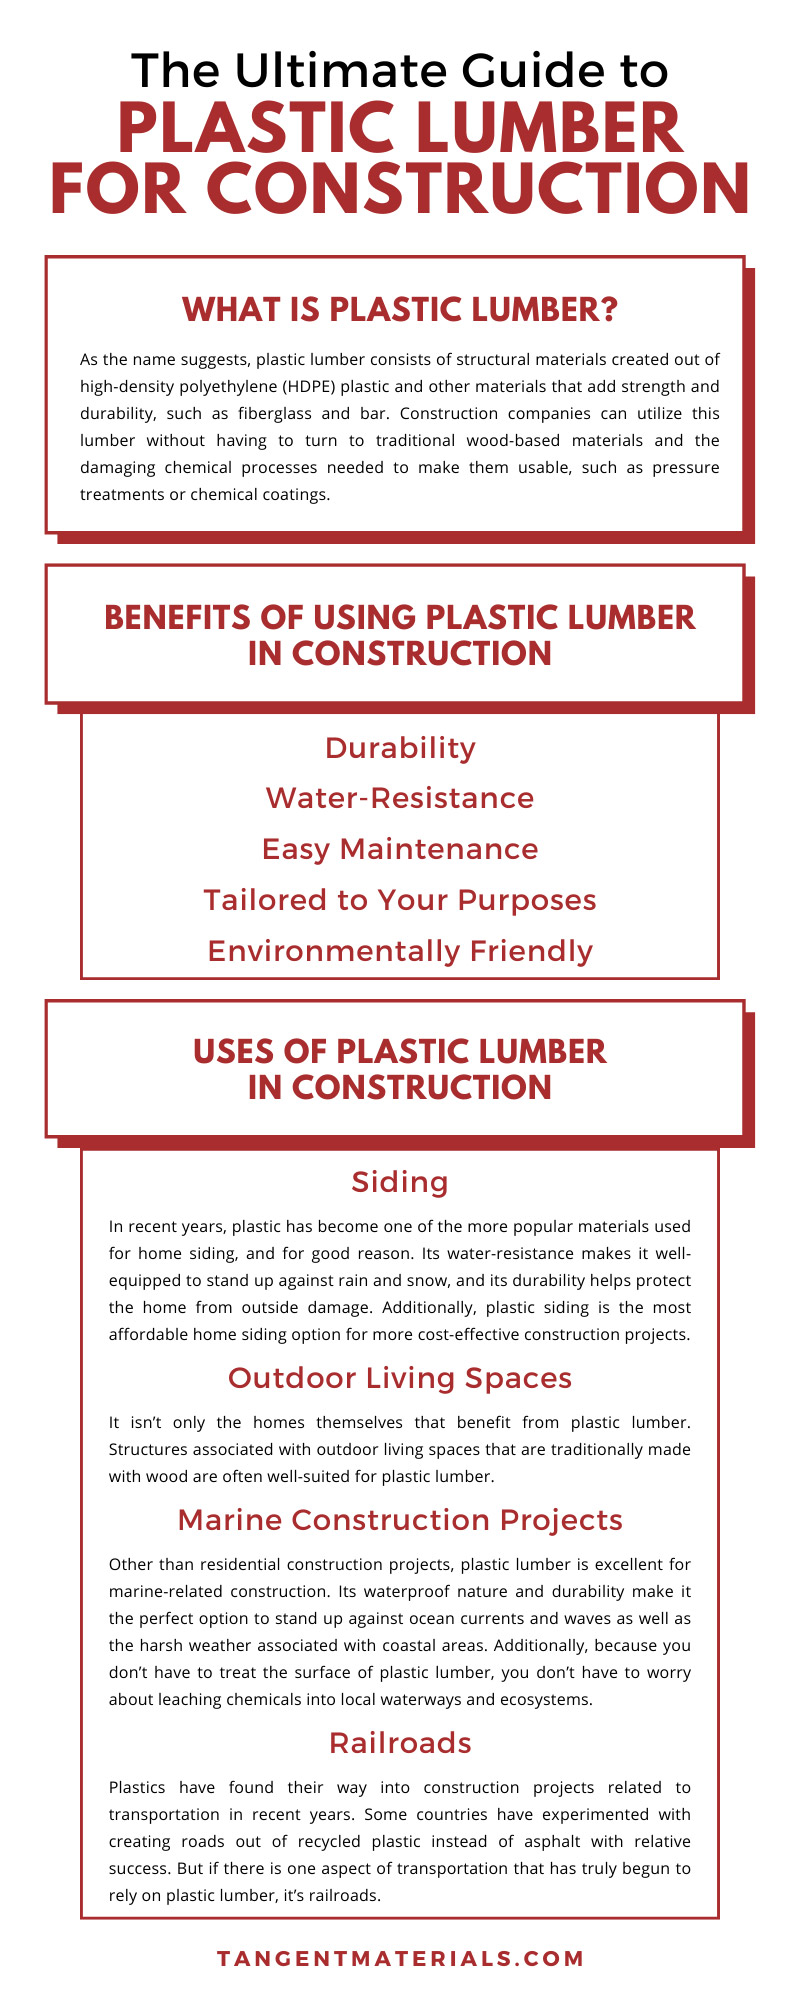 The Ultimate Guide to Plastic Lumber for Construction